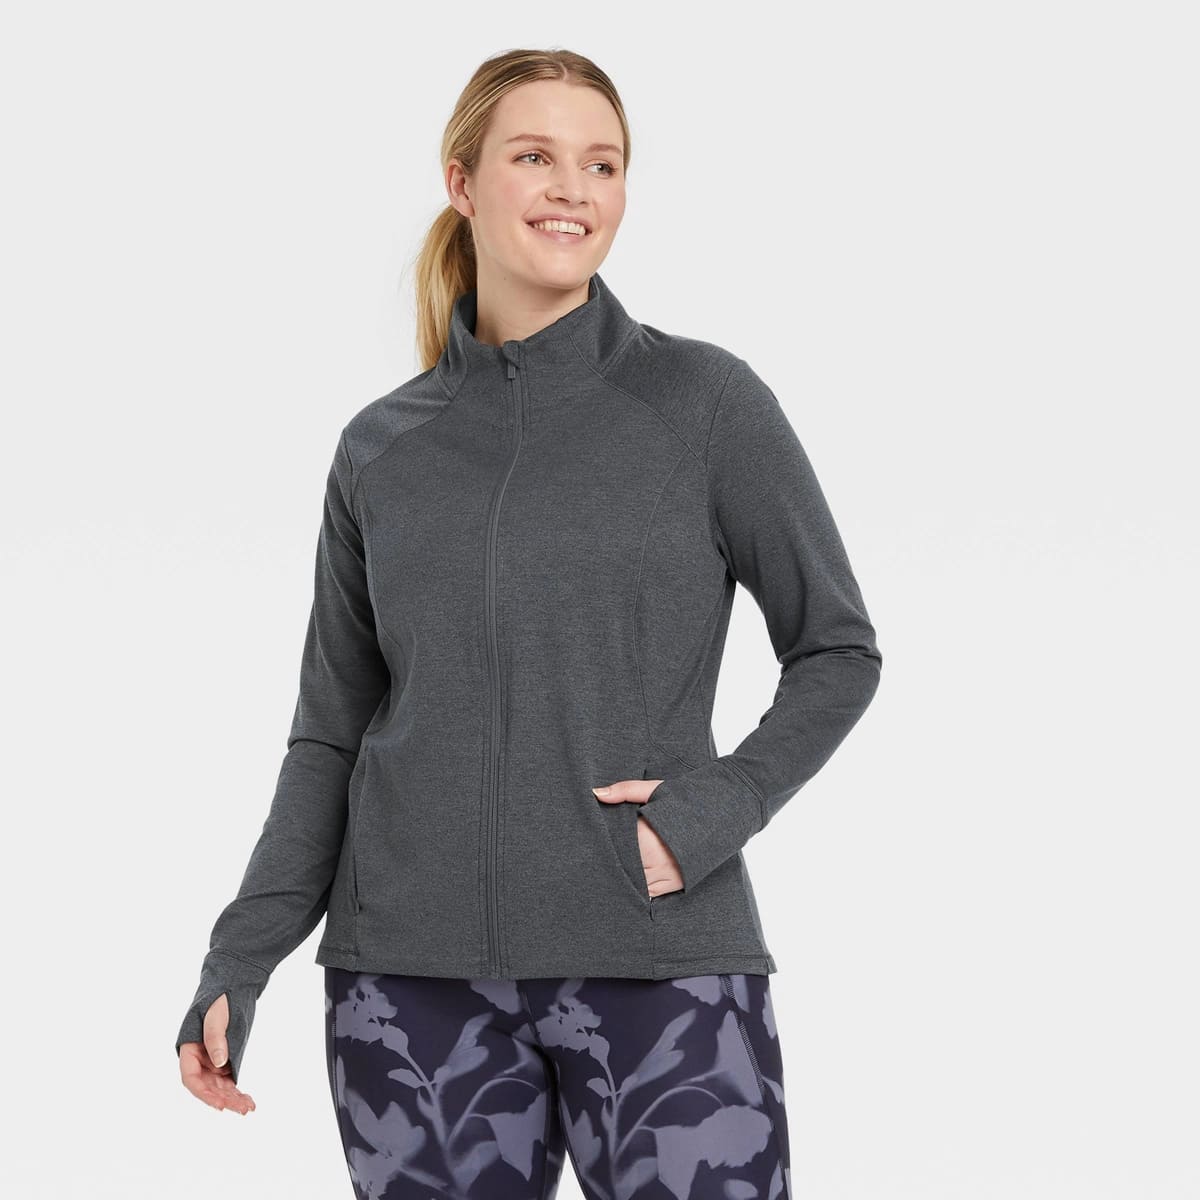 Women's Zip-Front Jacket - All in Motion™ from Target